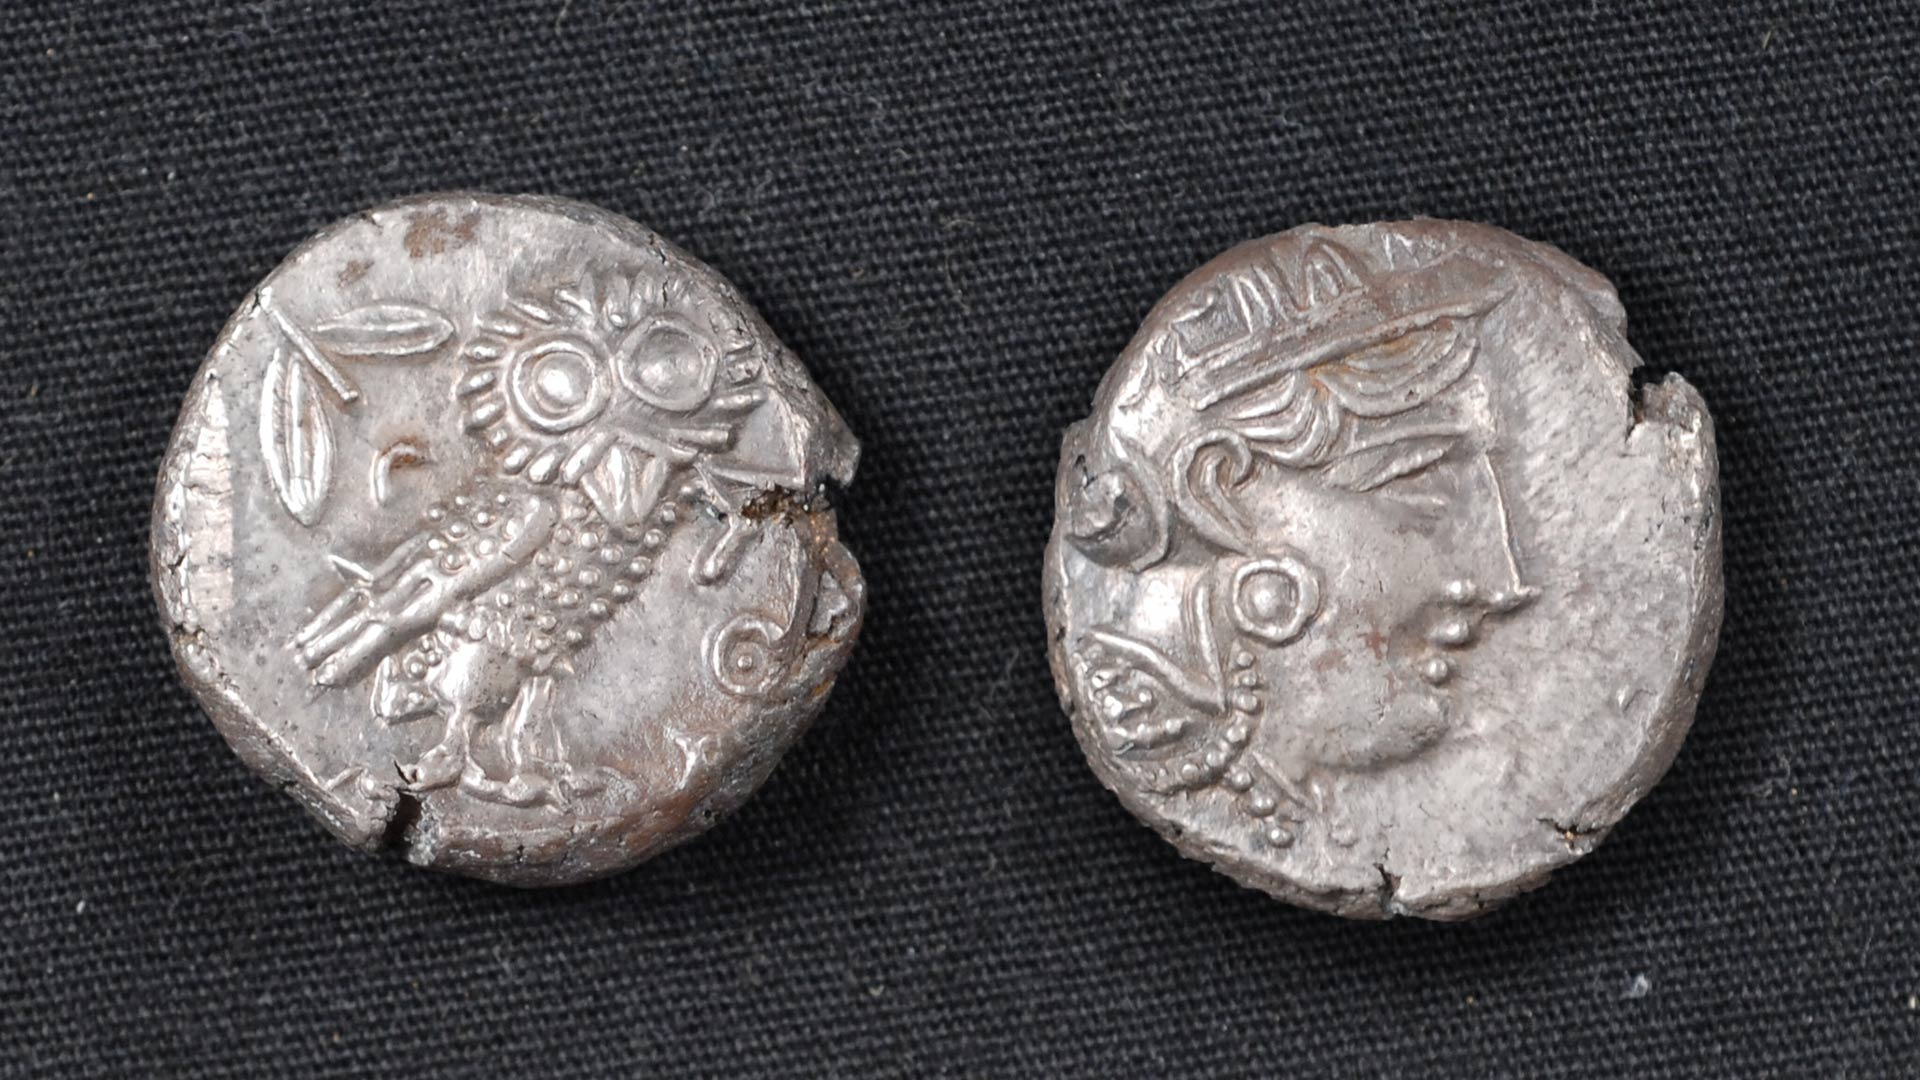 Two Ancient Athenian coins, one featuring an image the Owl of Athena, the other featuring an image of a person